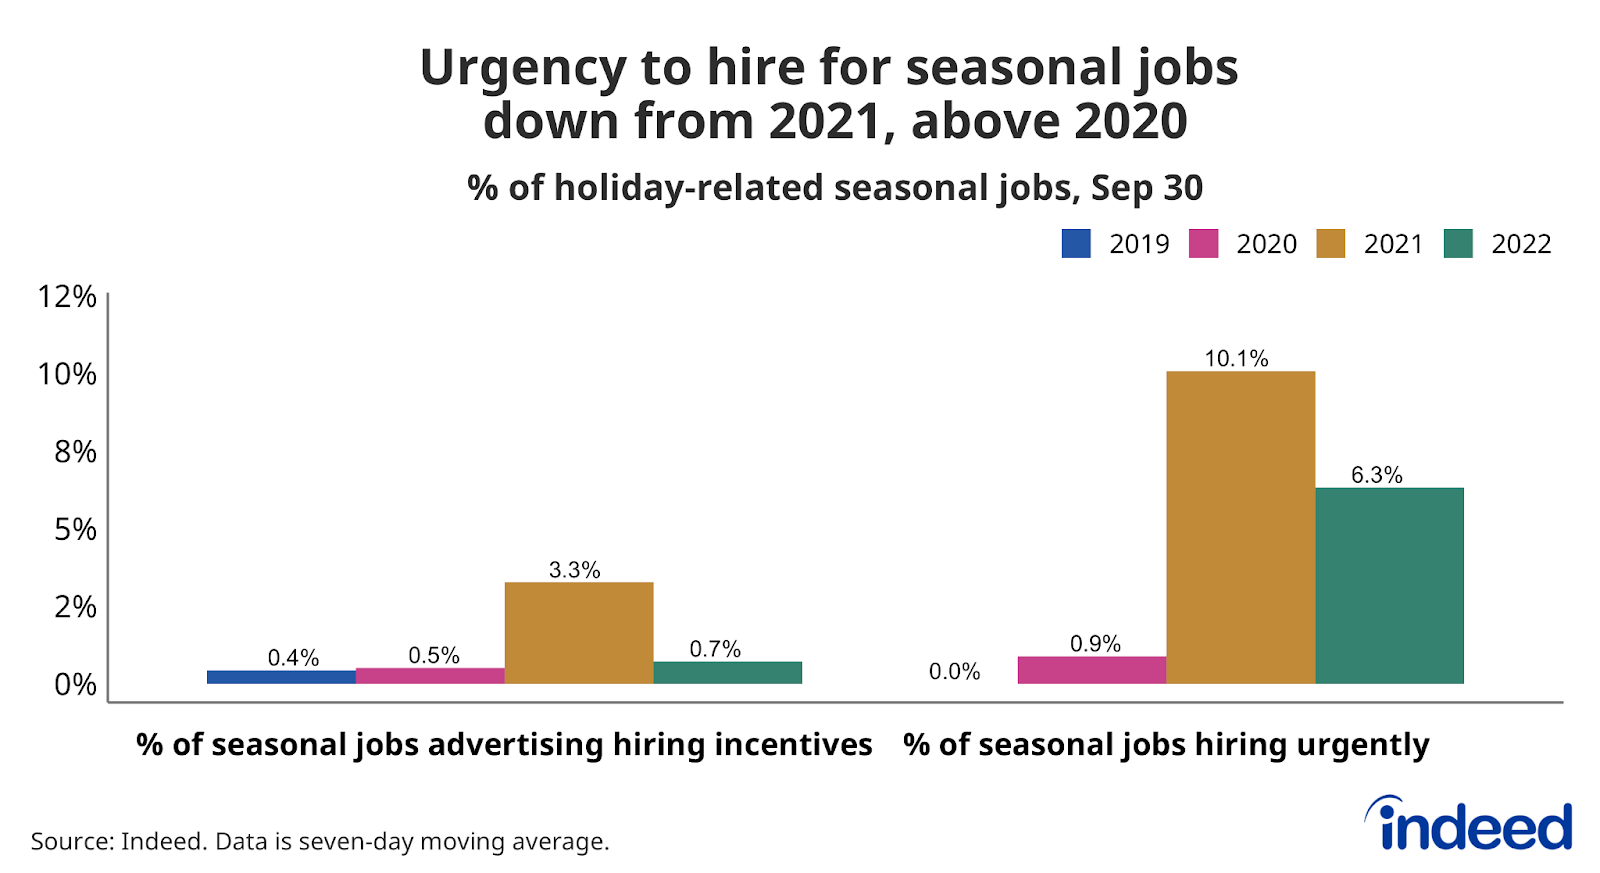 Bar chart titled “Urgency to hire for seasonal jobs down from 2021, above 2020.”